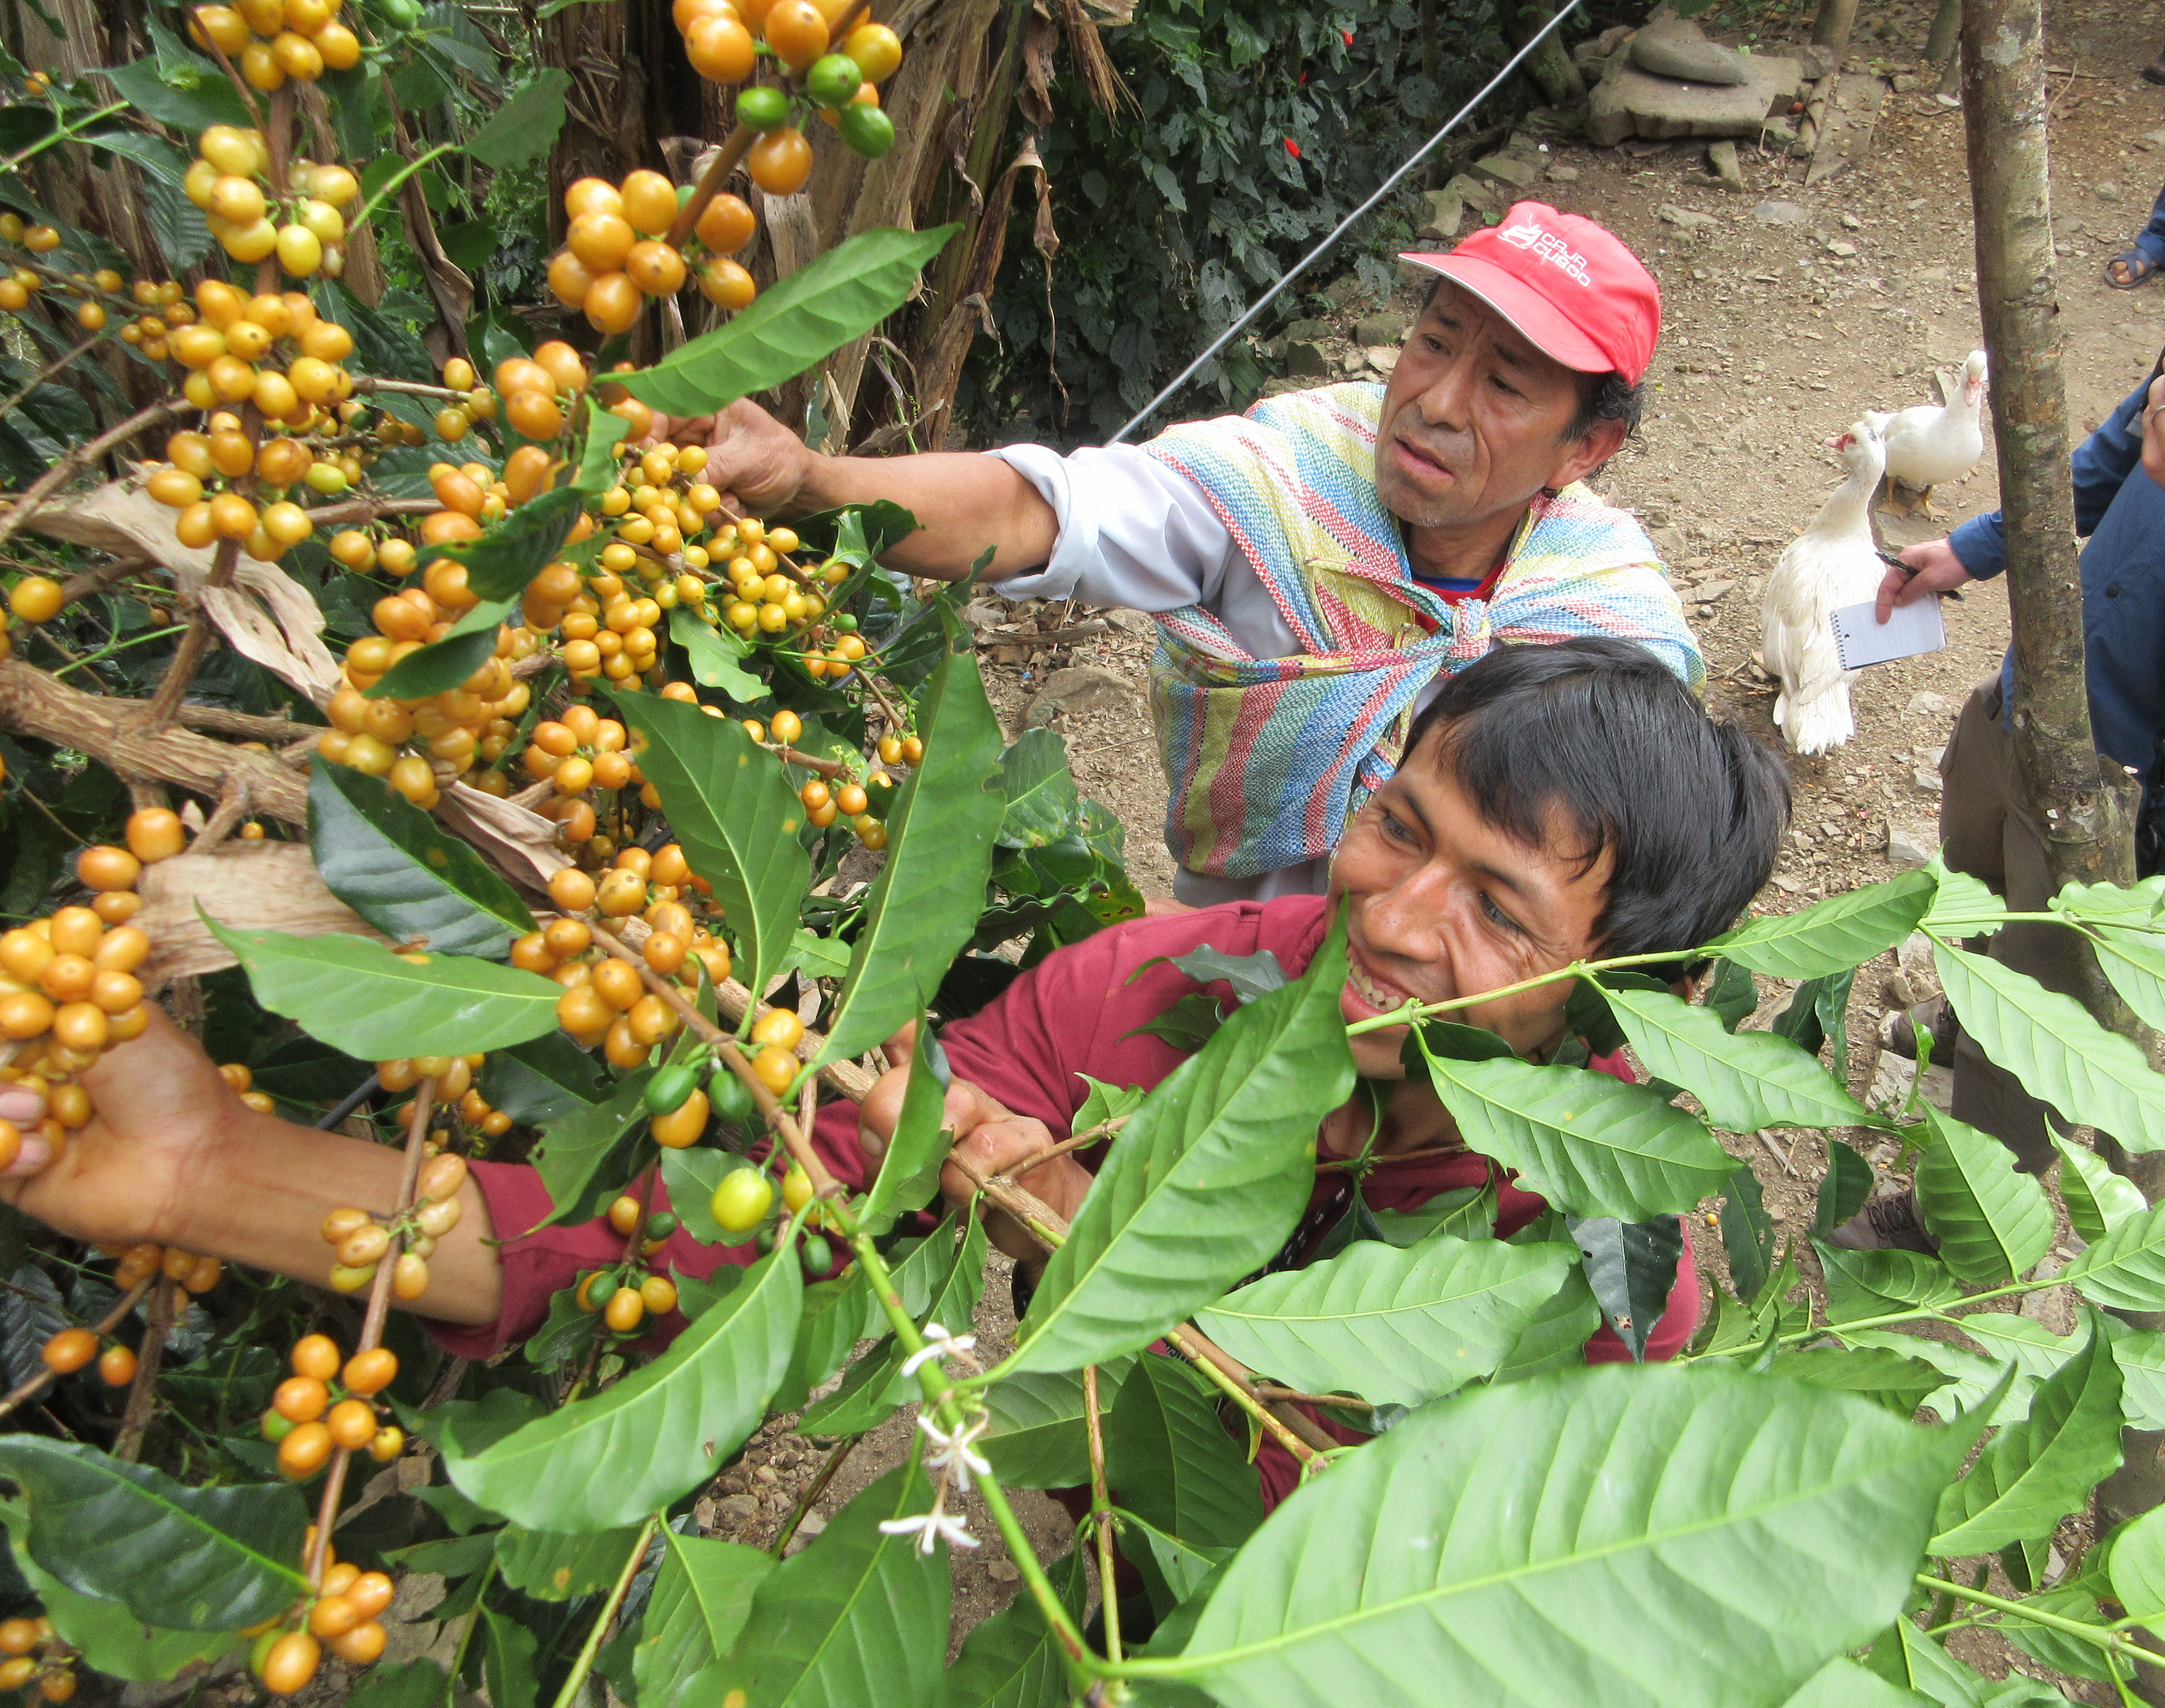 Men picking coffee cherries and smiling.